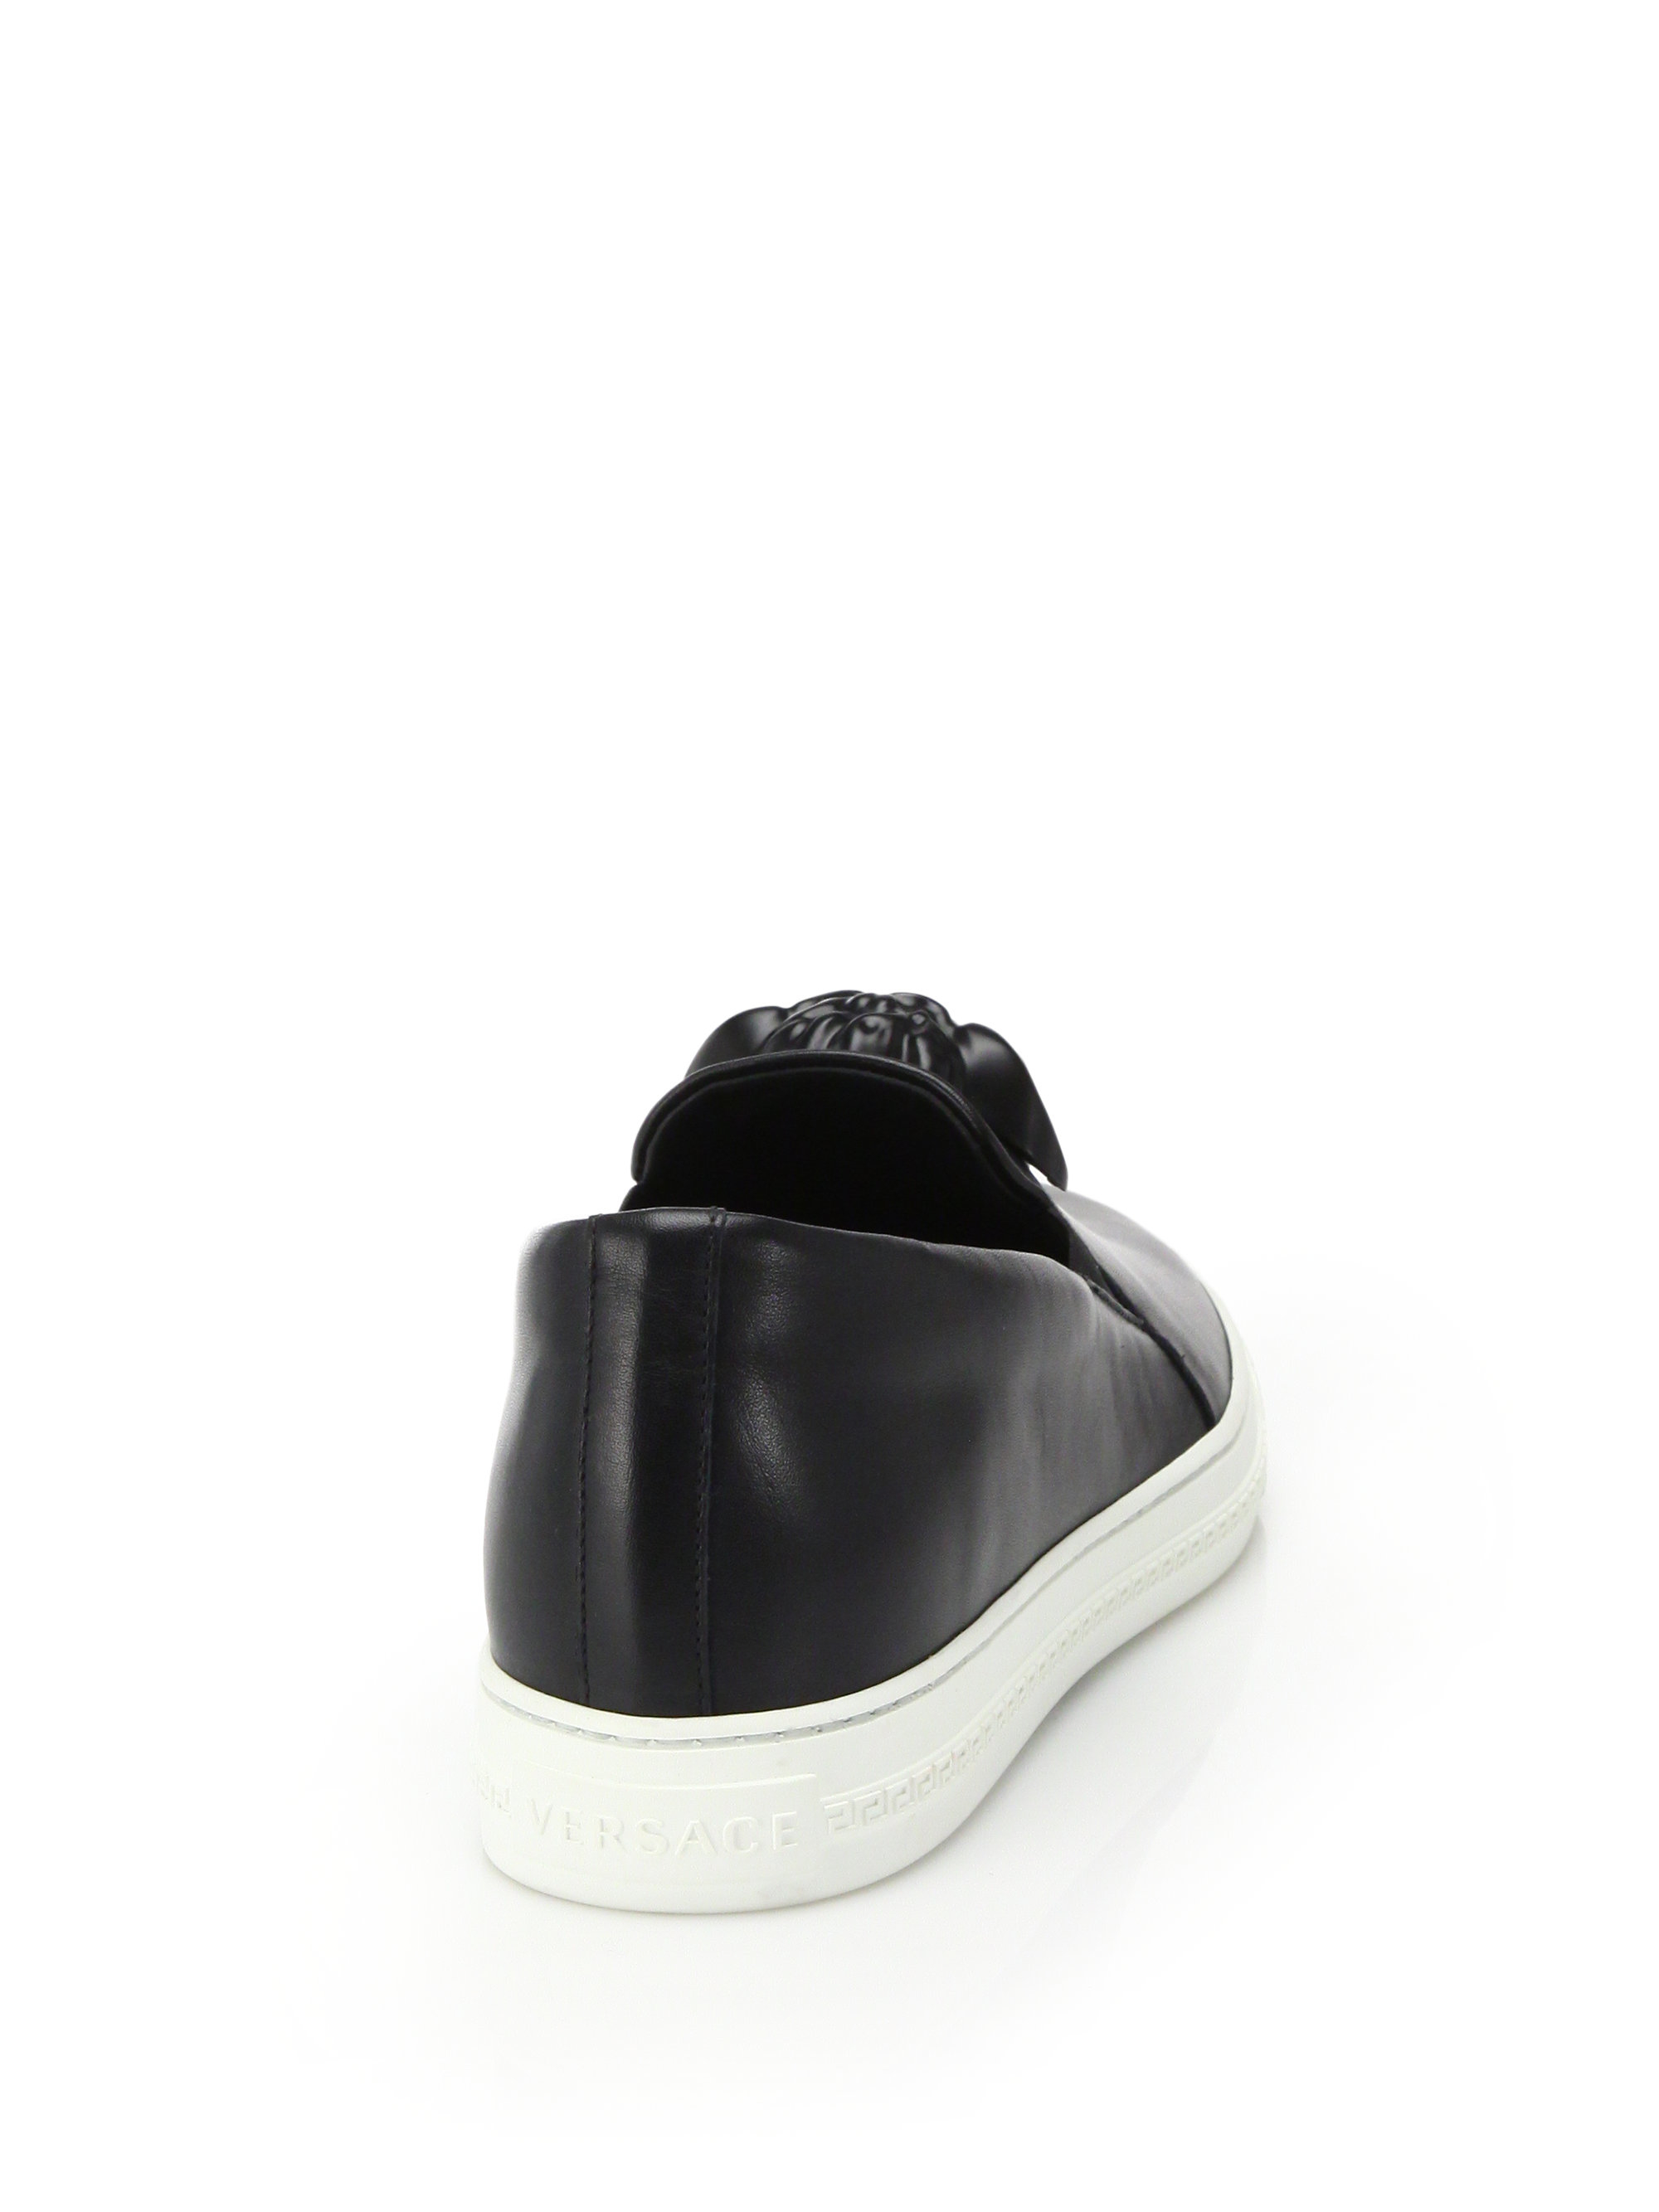 Versace Leather Medusa Palazzo Slip-on Sneakers in Black for Men - Lyst